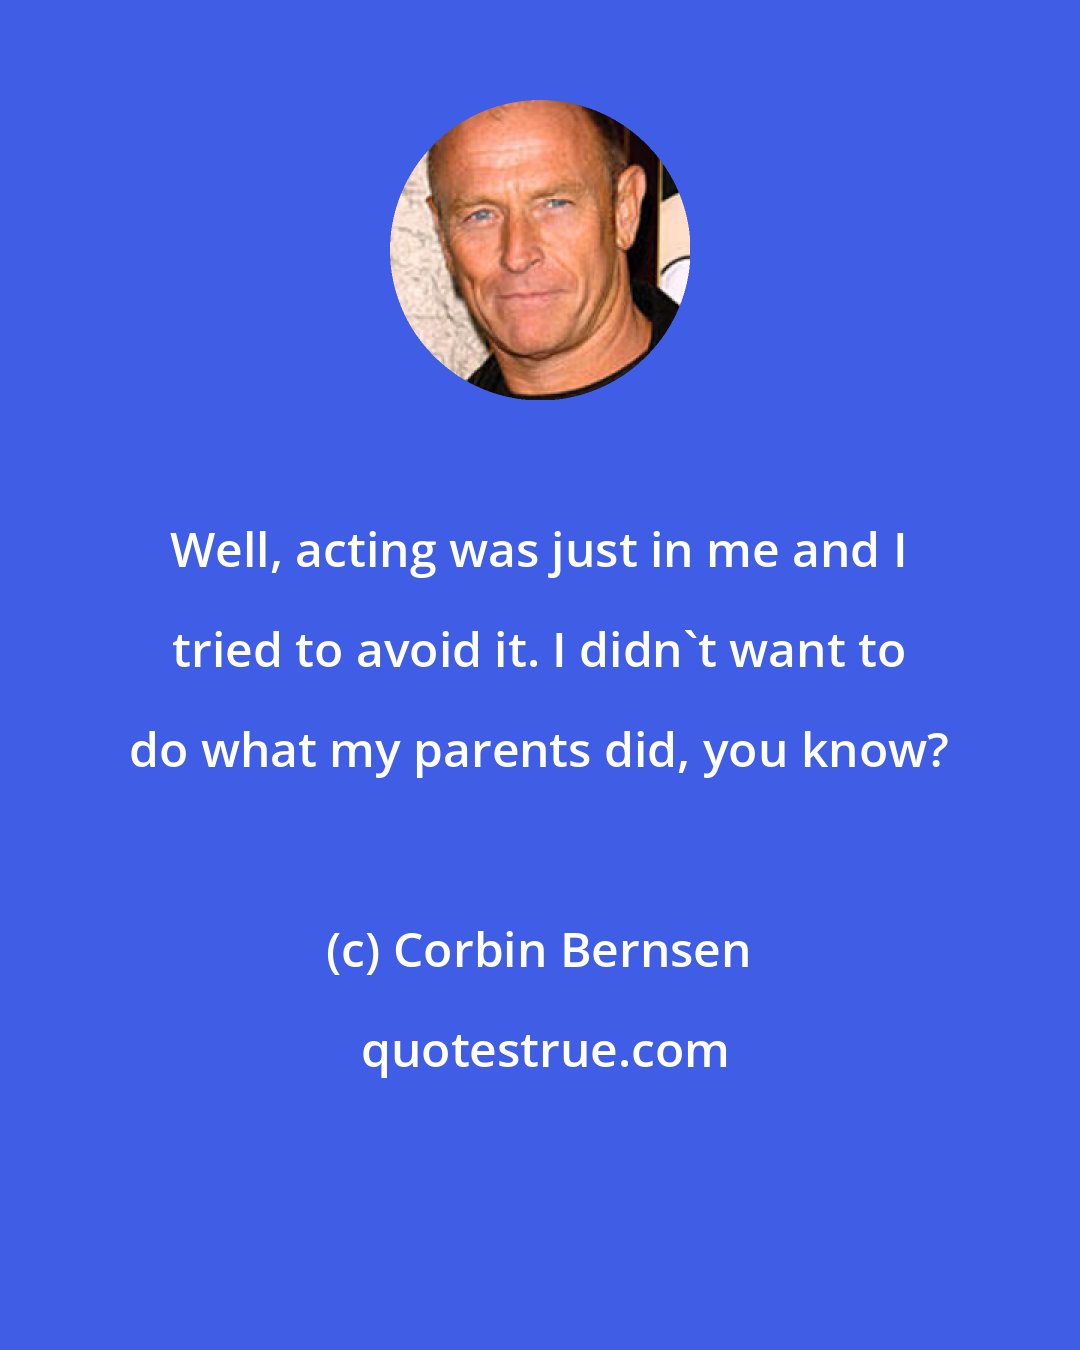 Corbin Bernsen: Well, acting was just in me and I tried to avoid it. I didn't want to do what my parents did, you know?